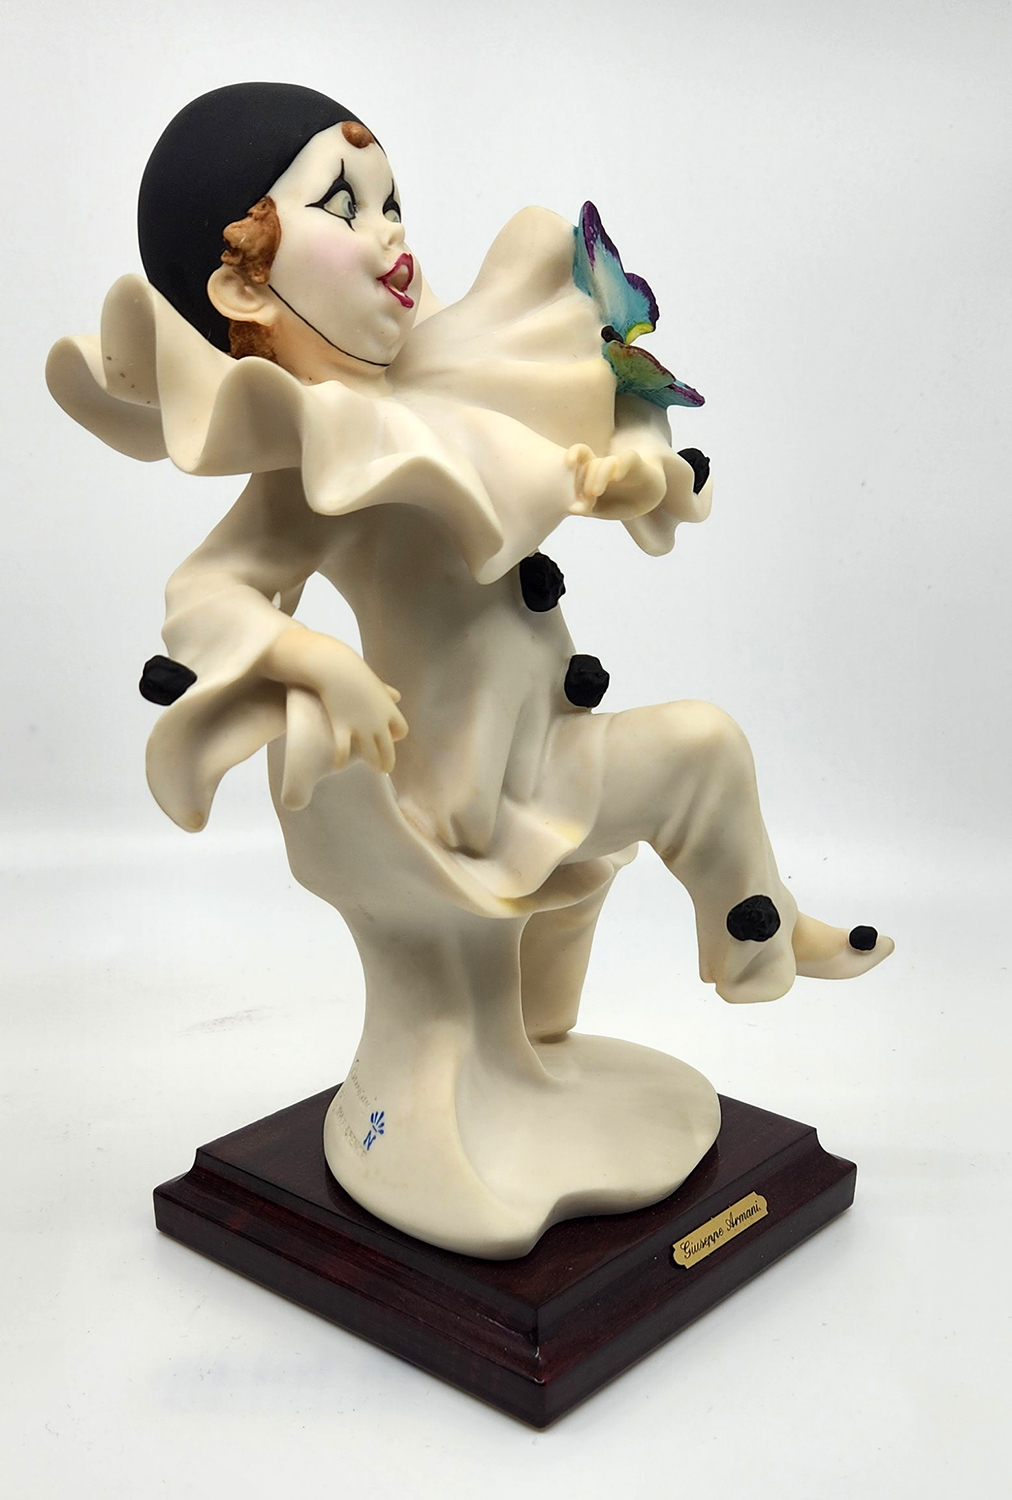 Giuseppe Armani SMALL PIERROT WITH BUTTERFLY 748P n/a Sculpture.